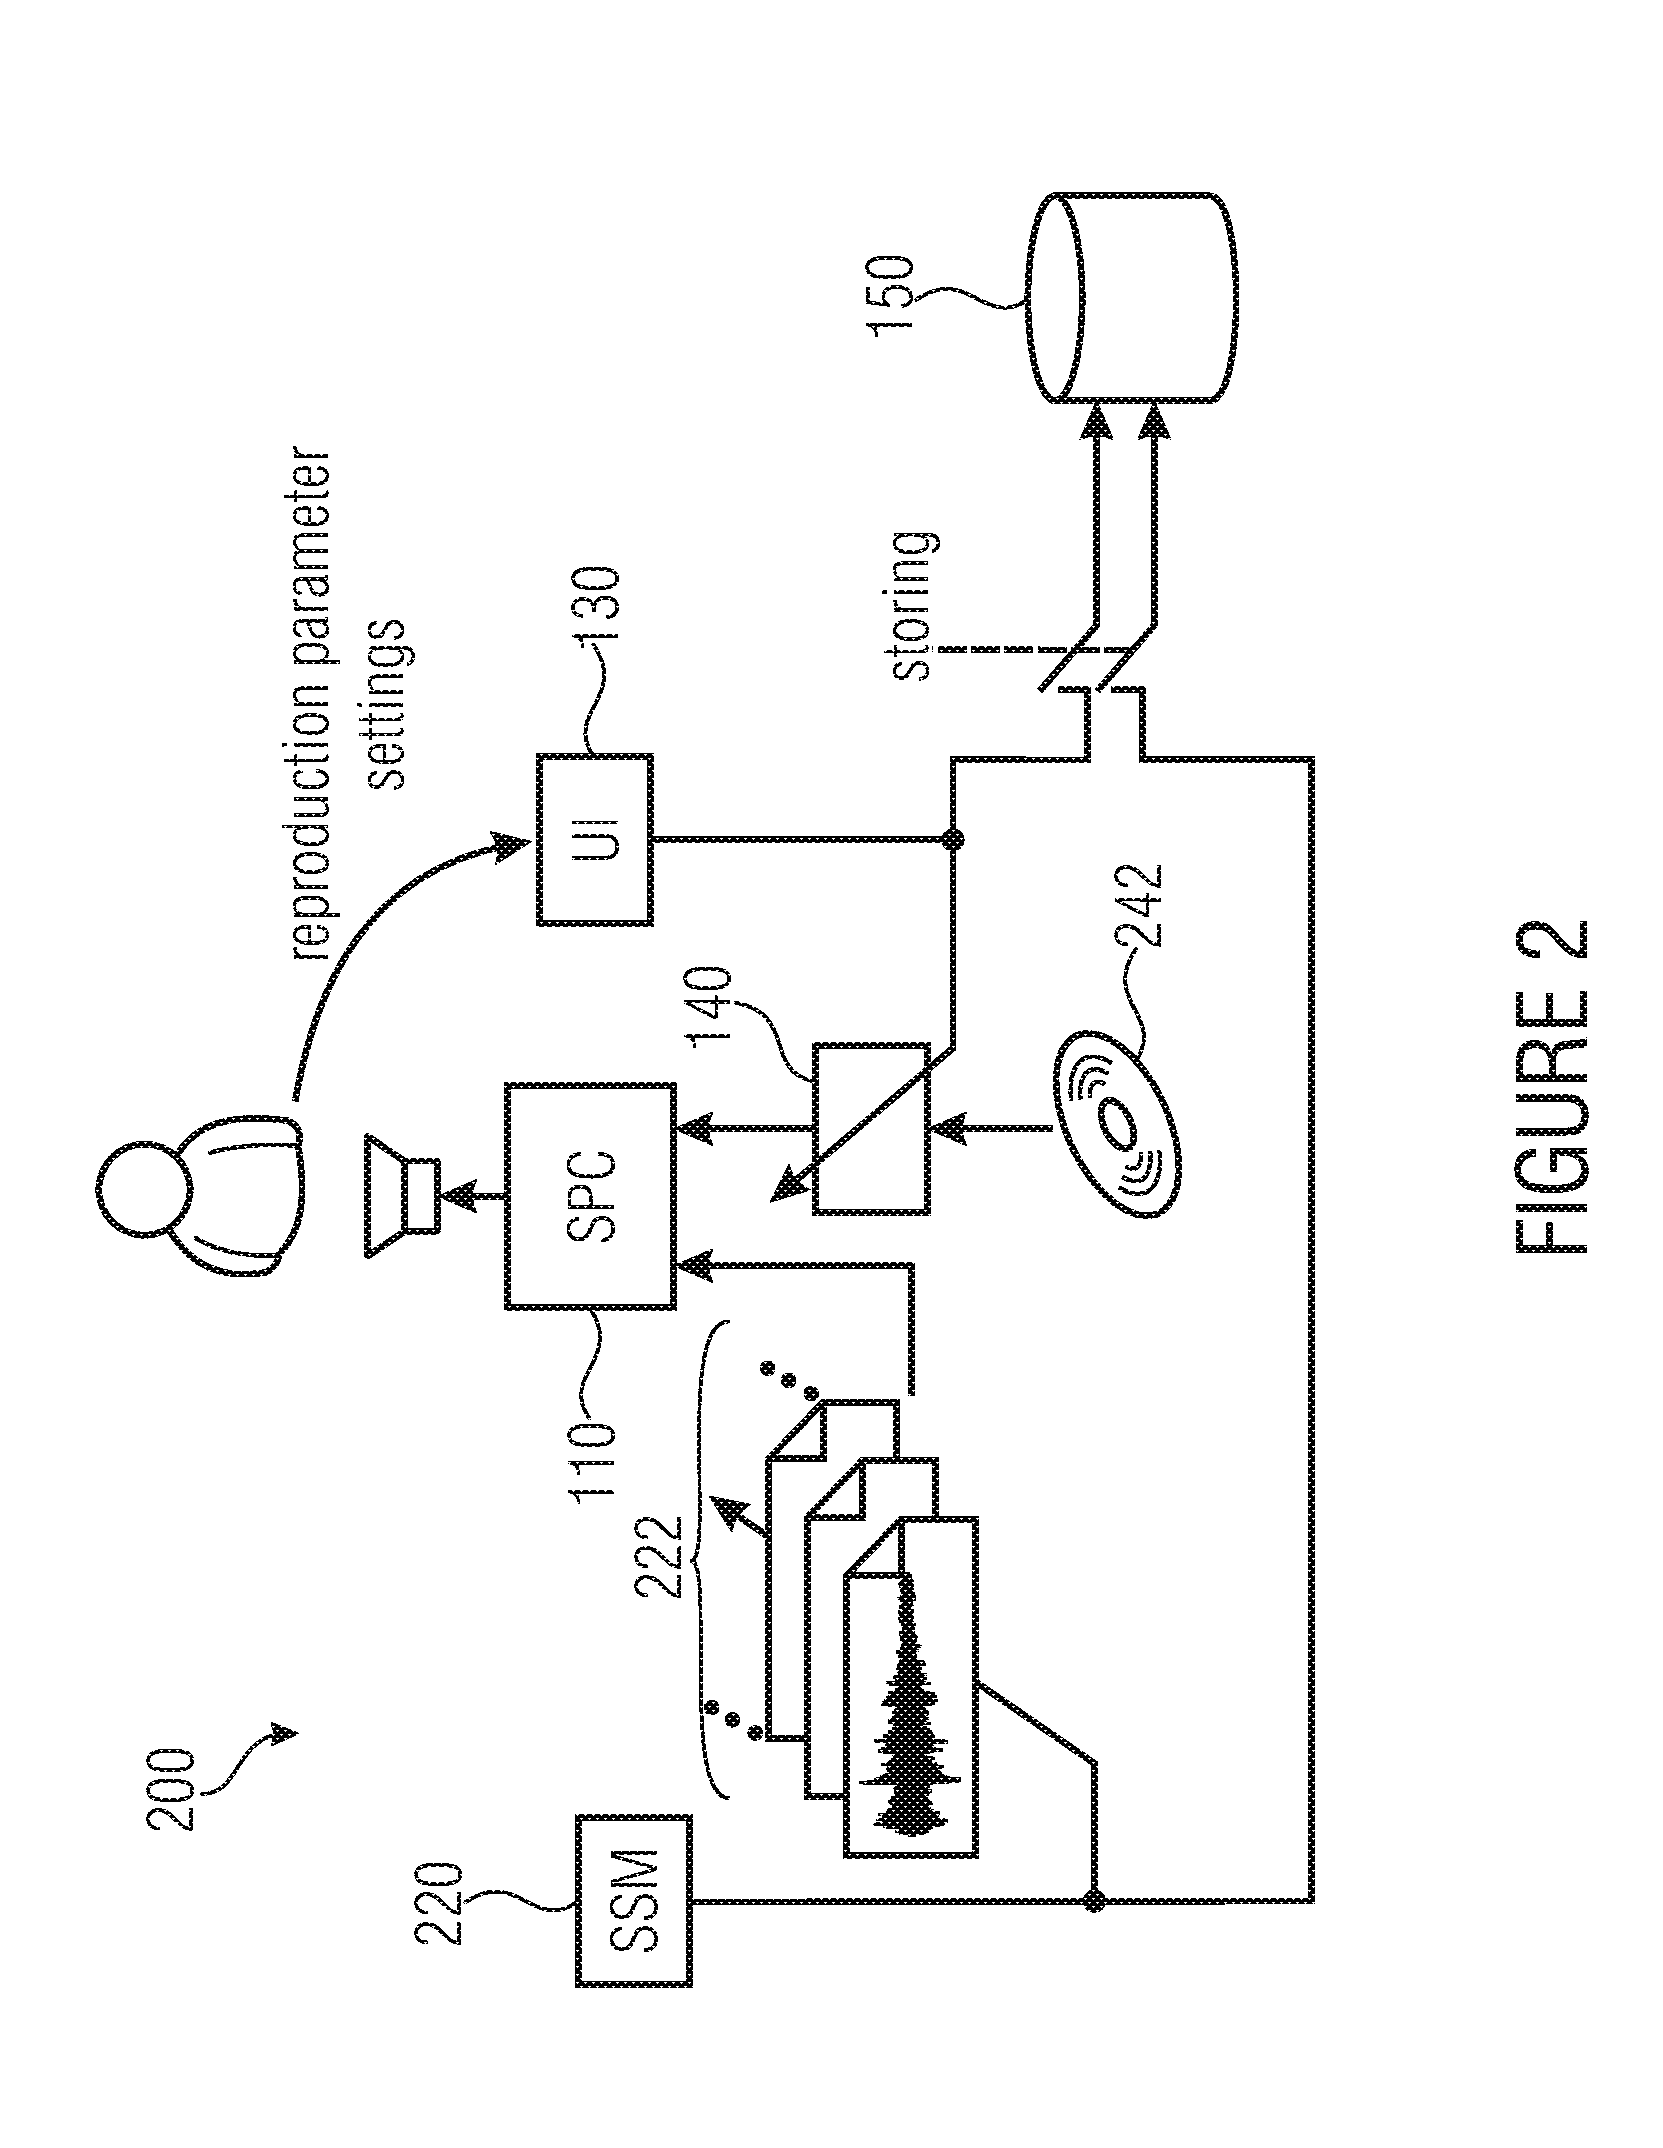 Sound reproduction device including auditory scenario simulation